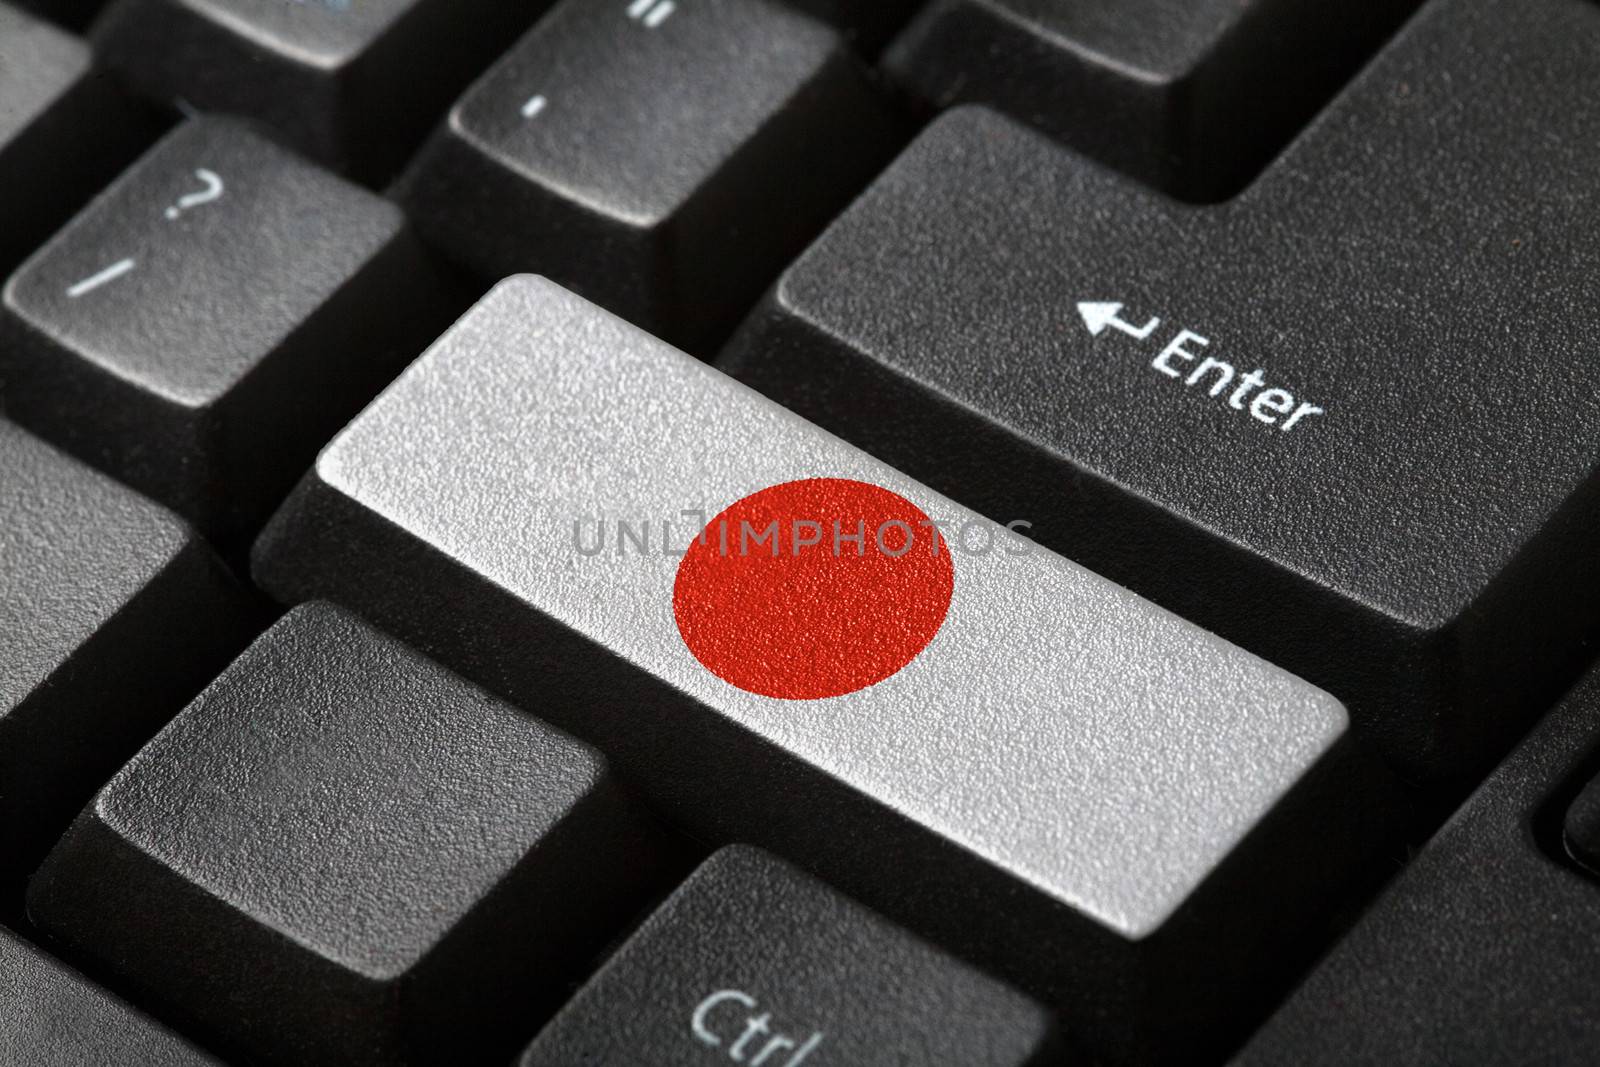 The Japan flag button on the keyboard. close-up